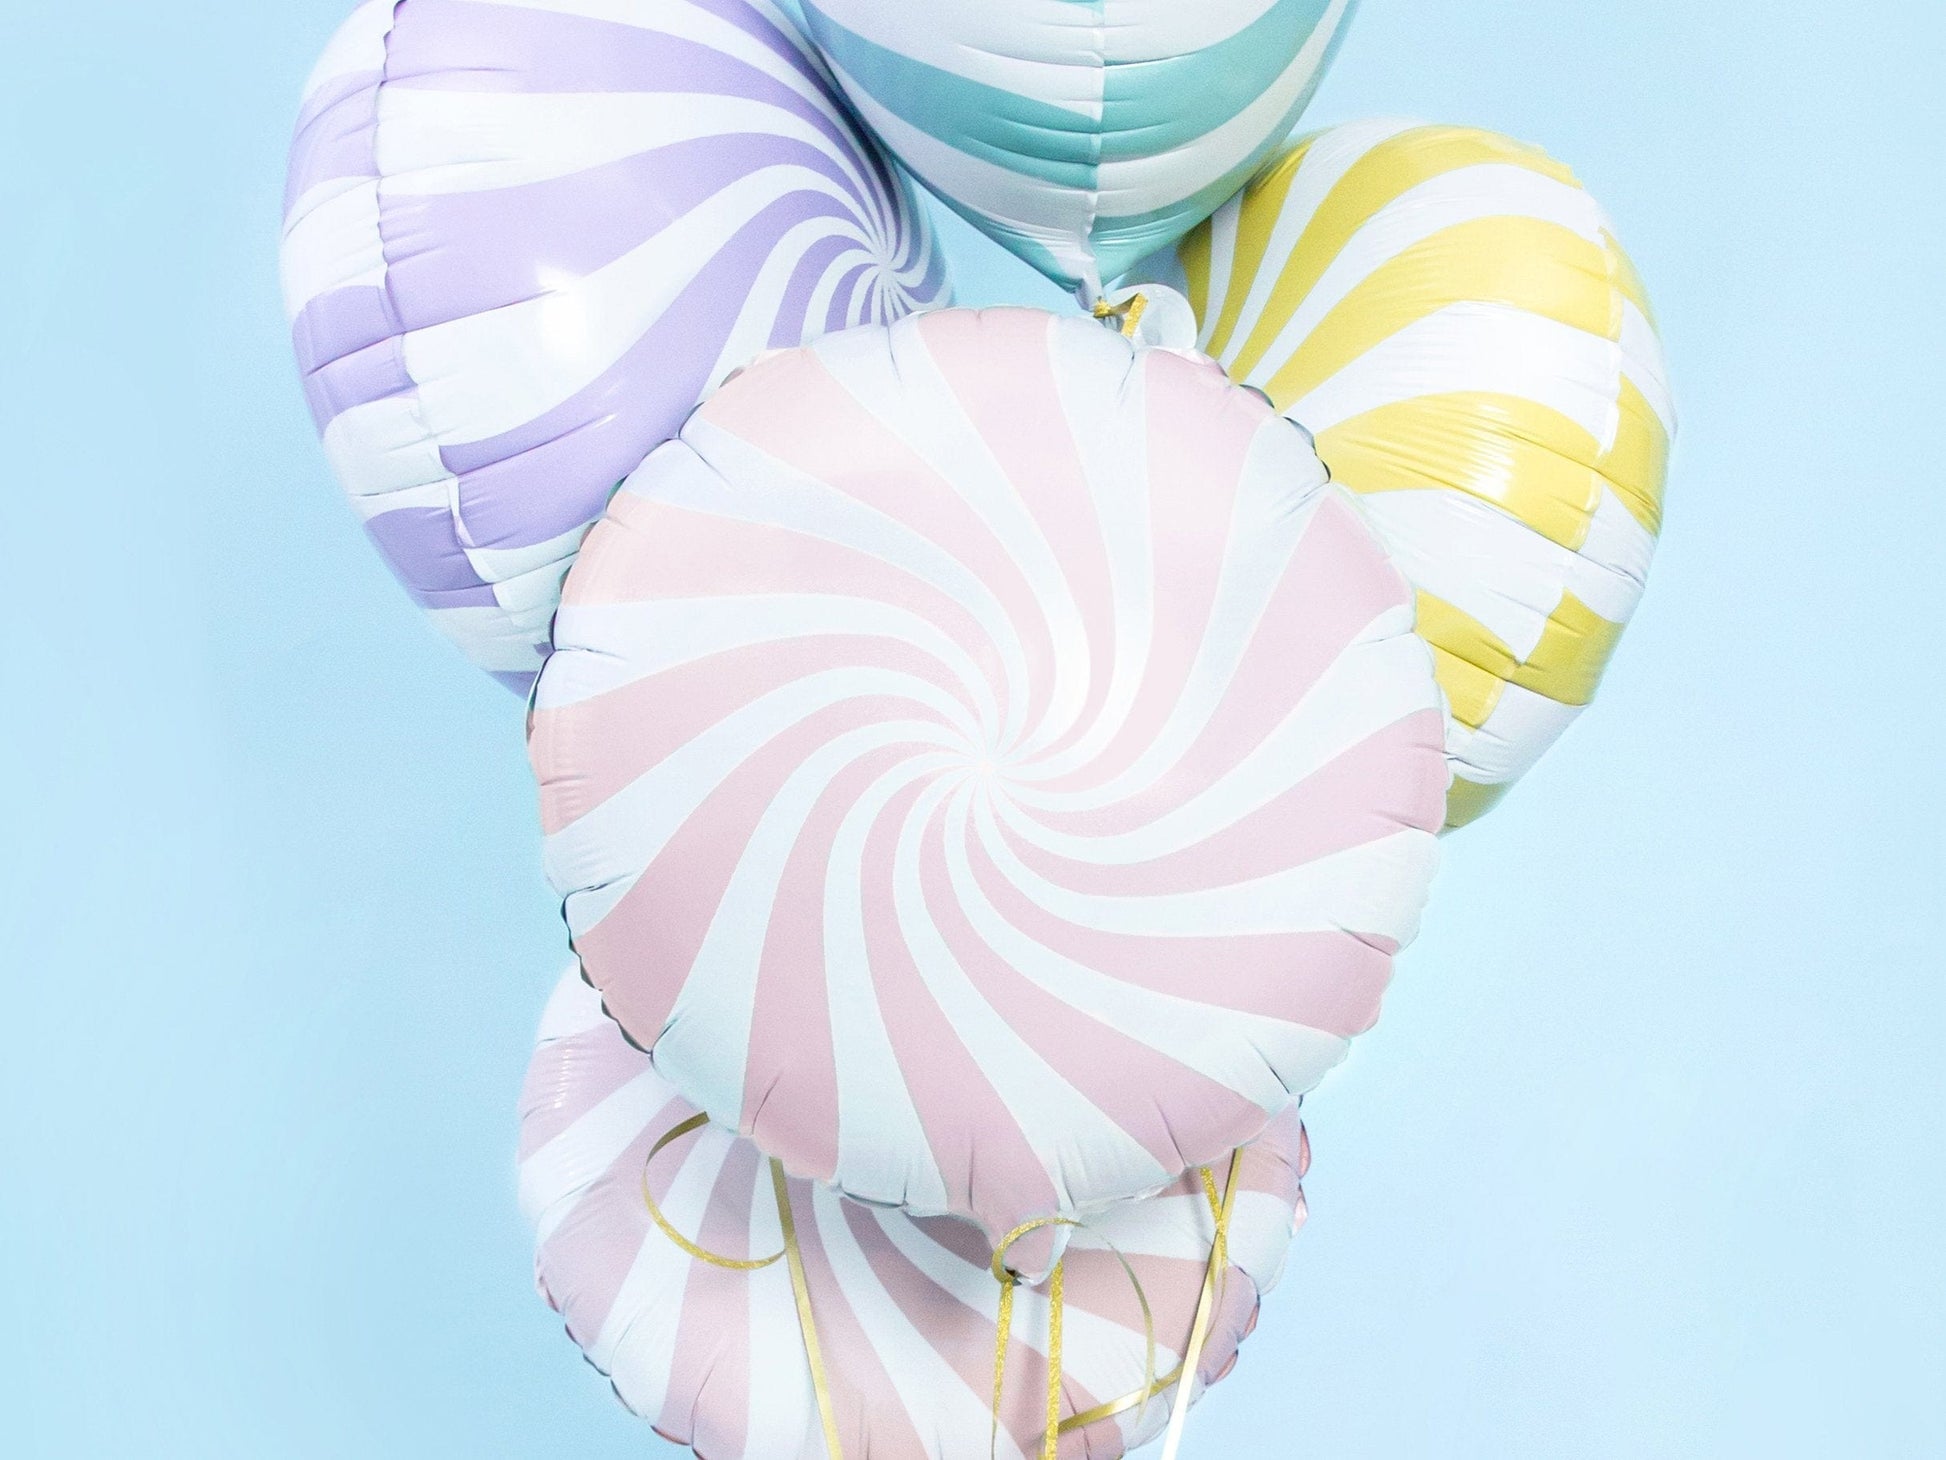 Candy Swirl Balloon | Lollipop Candy pastel pink | Online Balloonery Party Deco